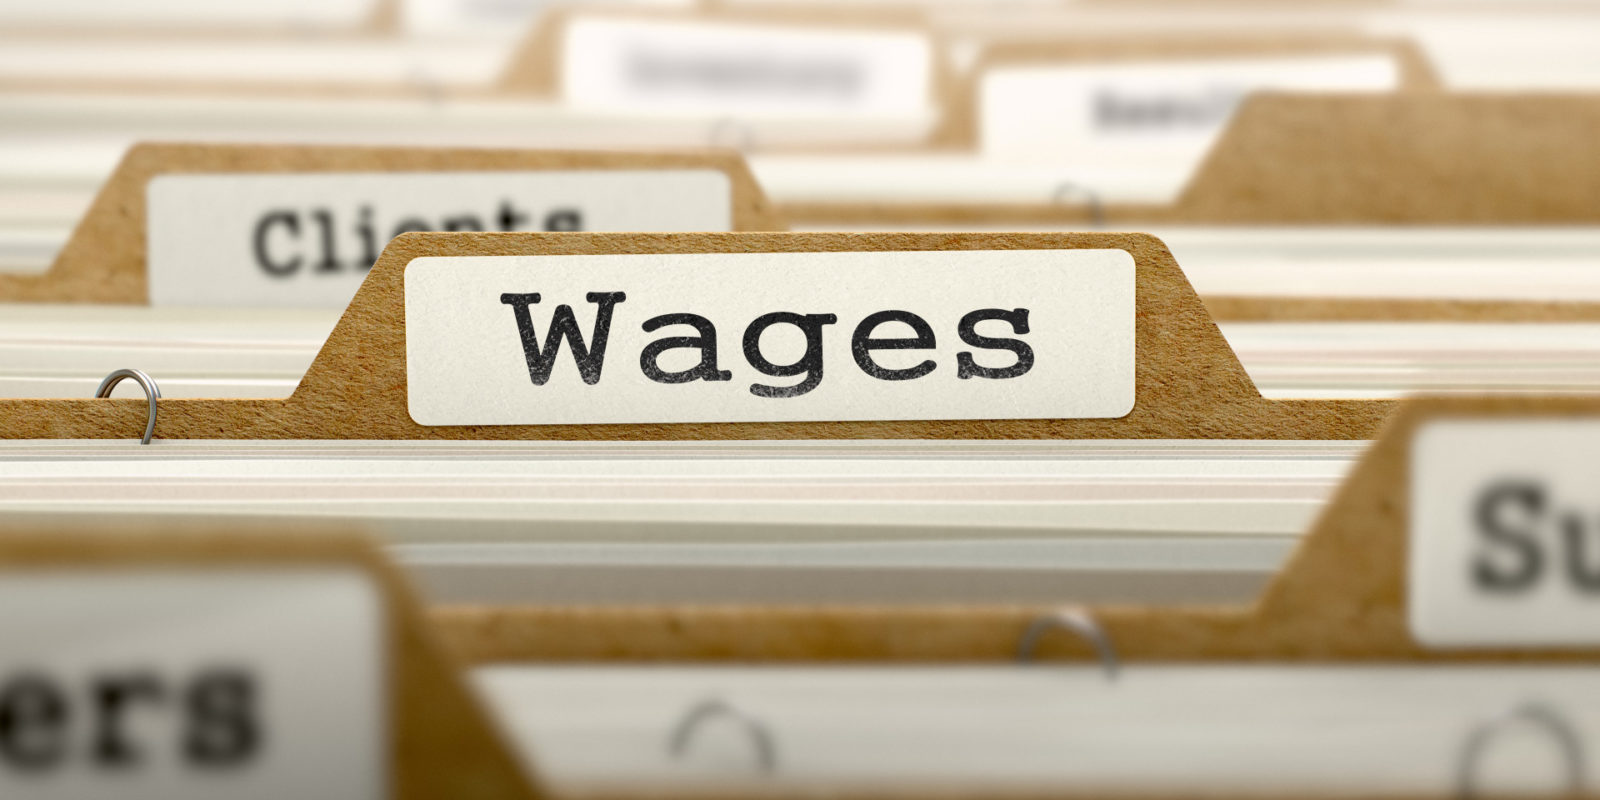 wages folder has documents regarding prevailing wage determination